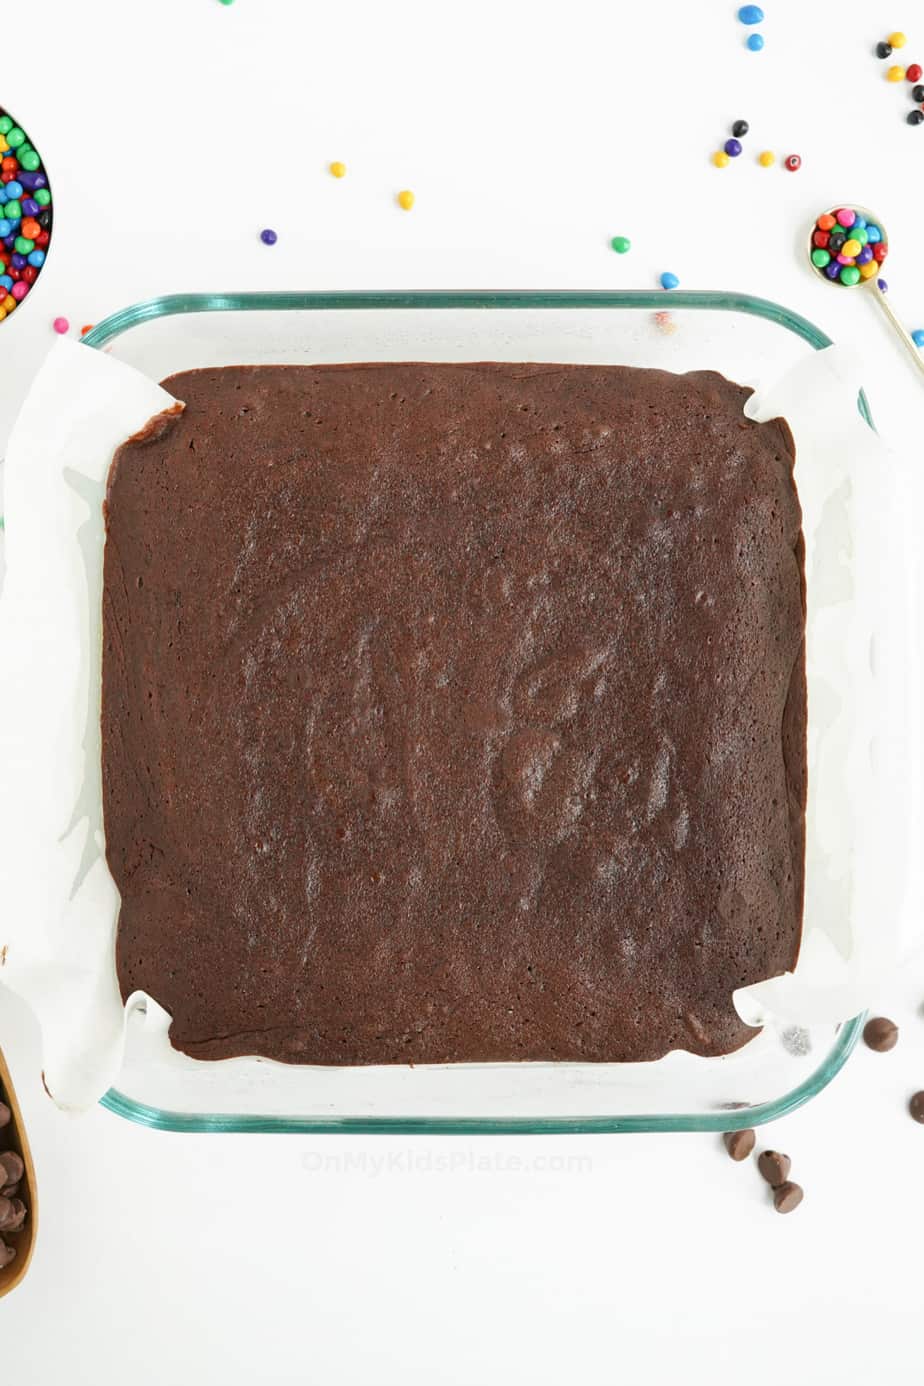 Baked chocolate brownies in a pan from overhead